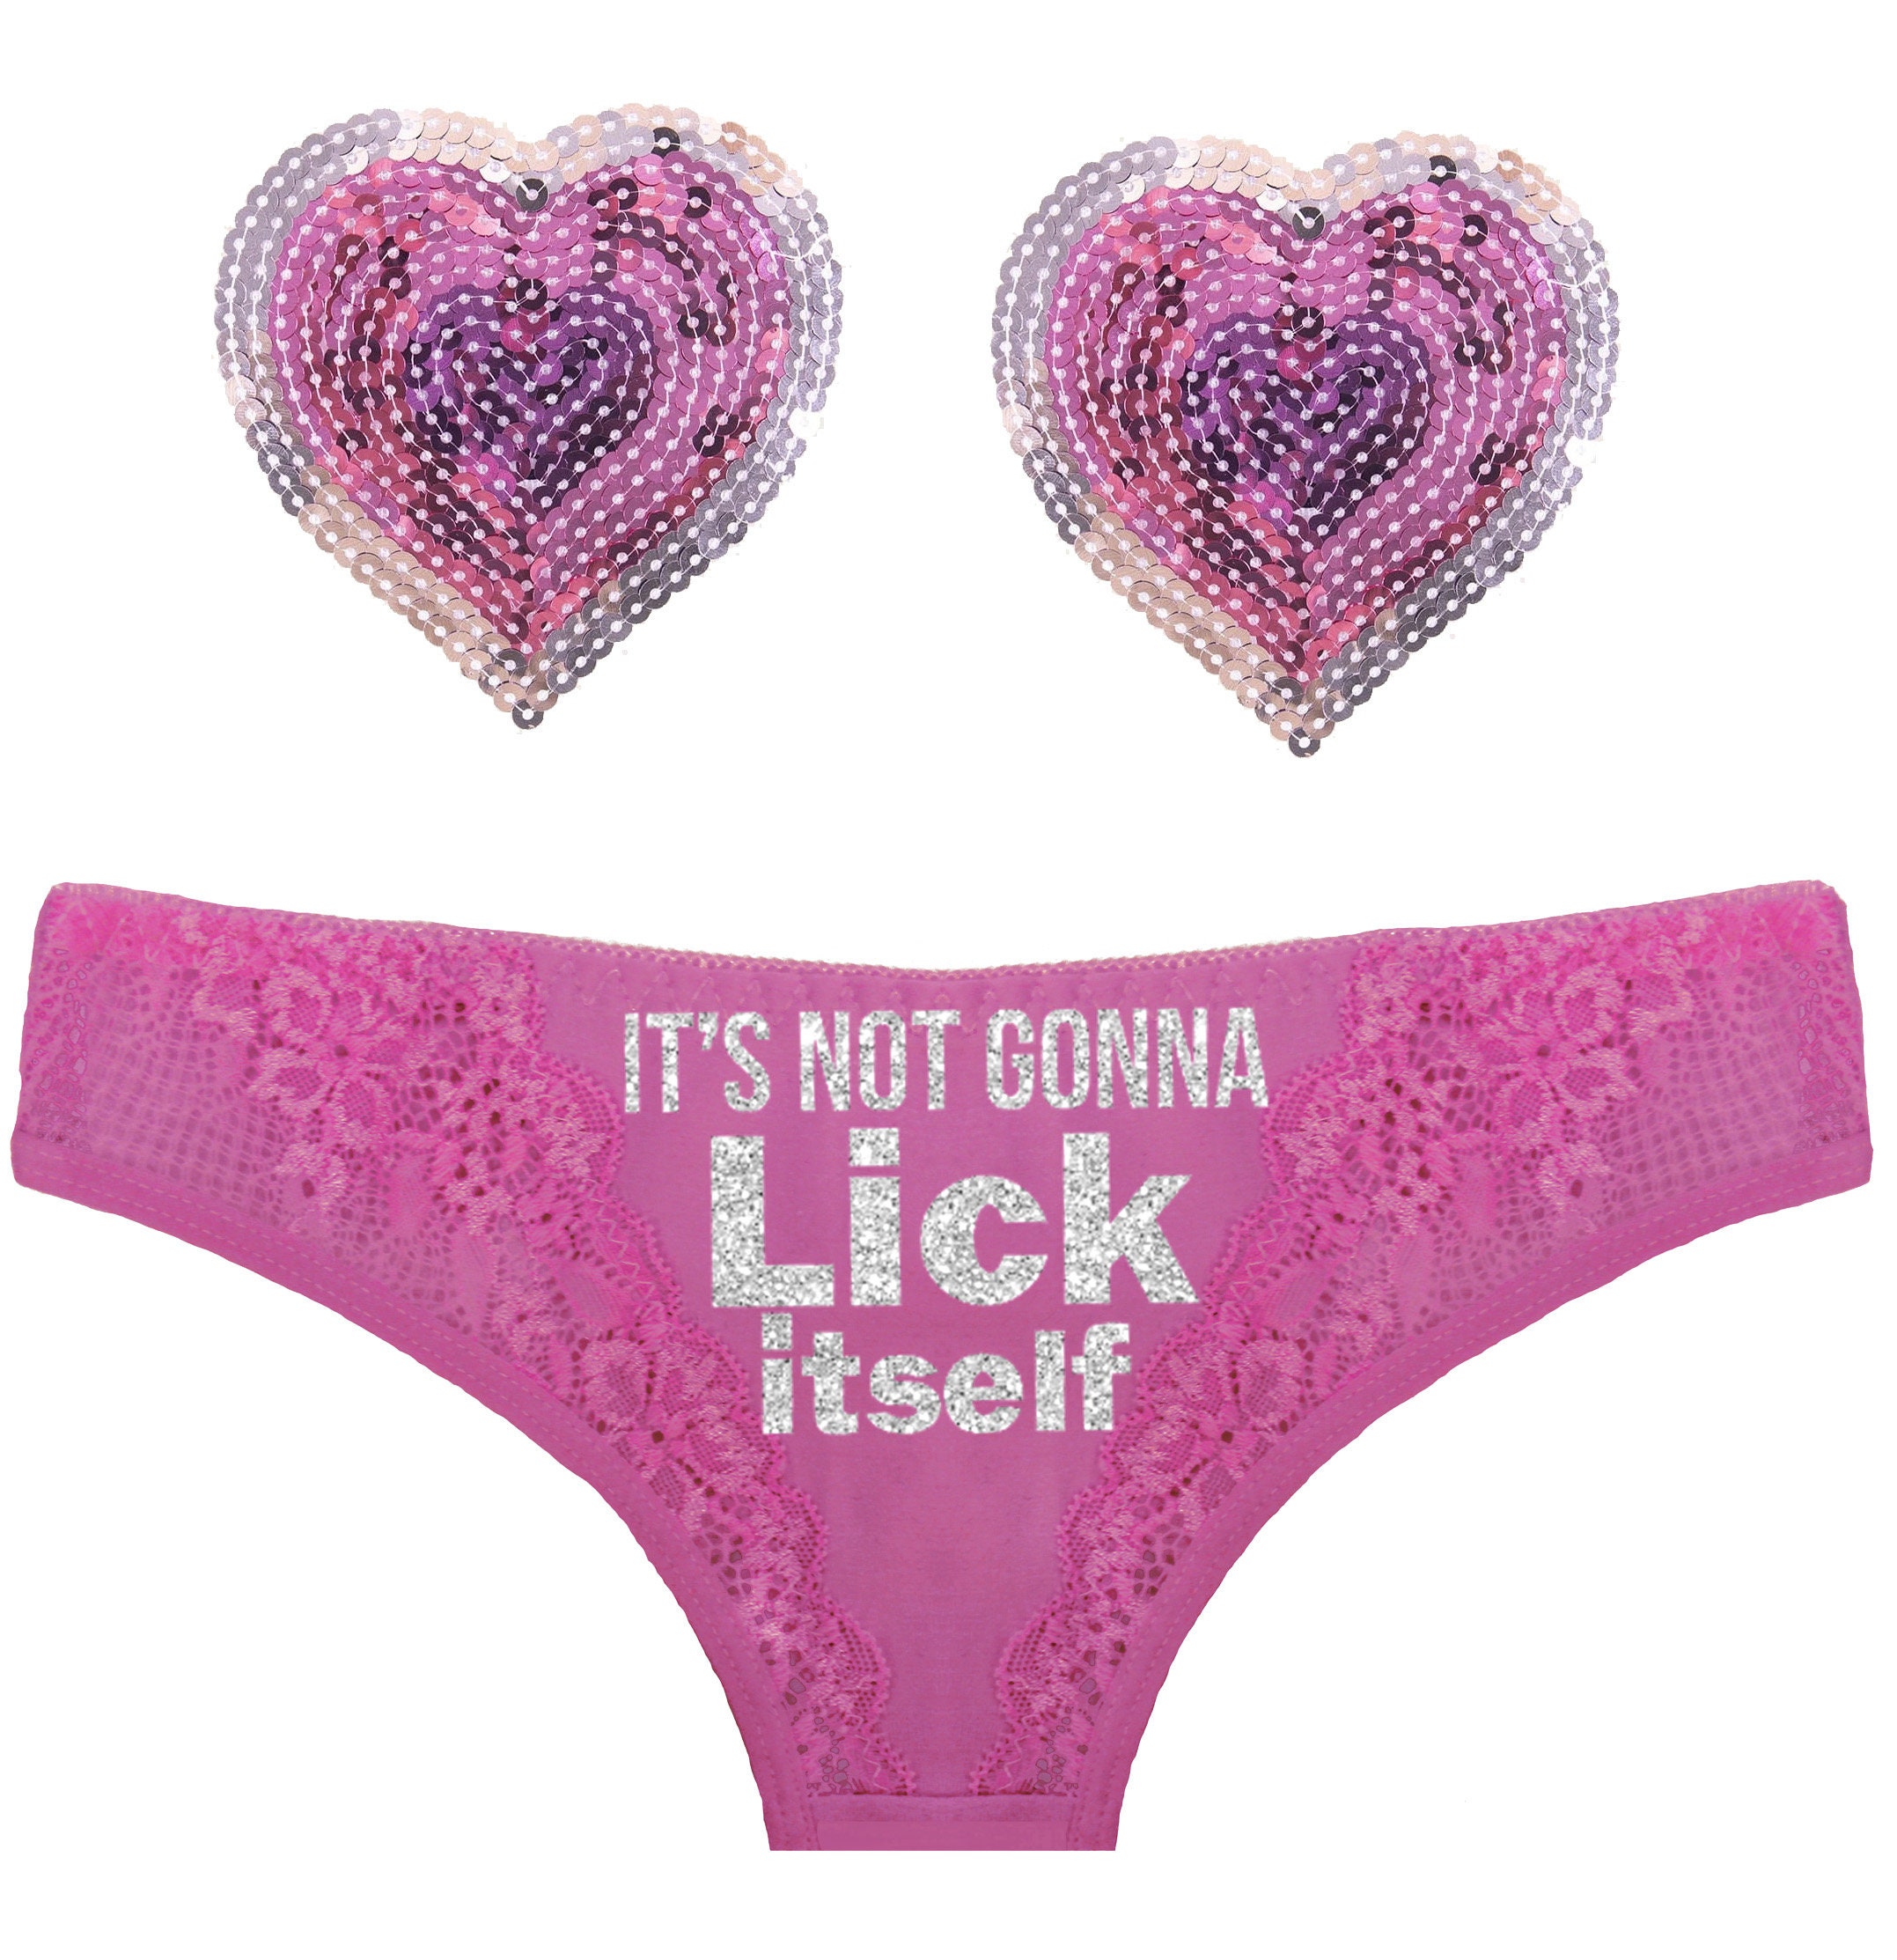 Pink Lace Panty Set It's Not Gonna Lick Itself Wife Undies, Pasties,  Girlfriend Gift, Anniversary Gift, Birthday Gift, Lingerie Shower, -   New Zealand